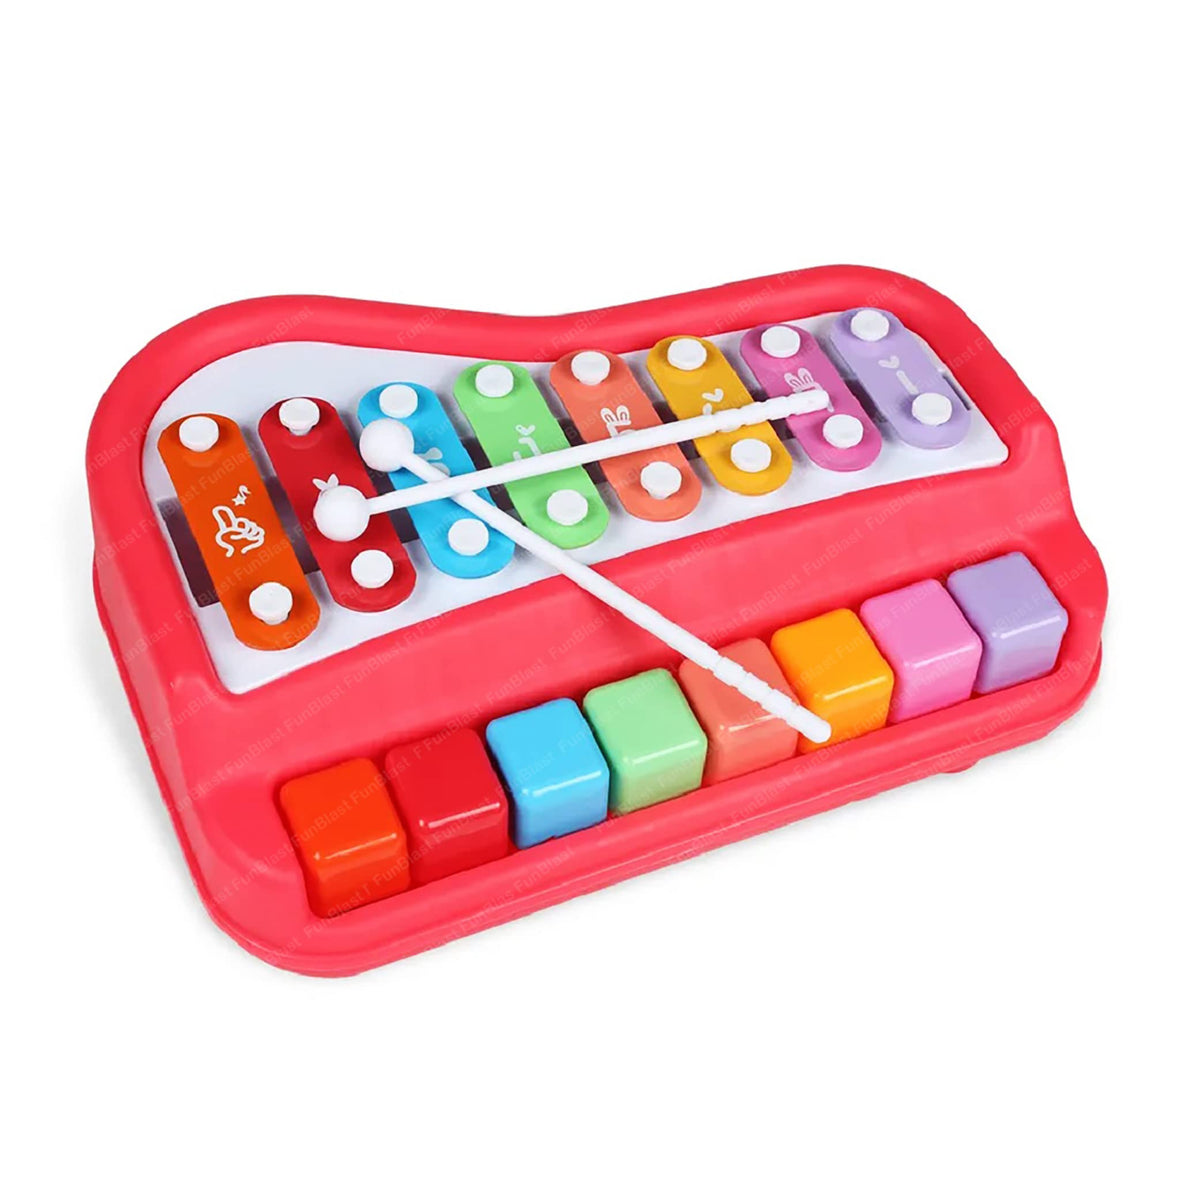 FunBlast Xylophone - Hand Knock Piano Toys, Hammering & Pounding Toys, Xylophone for Kids, Kids Musical Instruments, Kids Xylophone, Xylophone for 1+ Year Old, Kids Drums & Percussion Toy (Red)